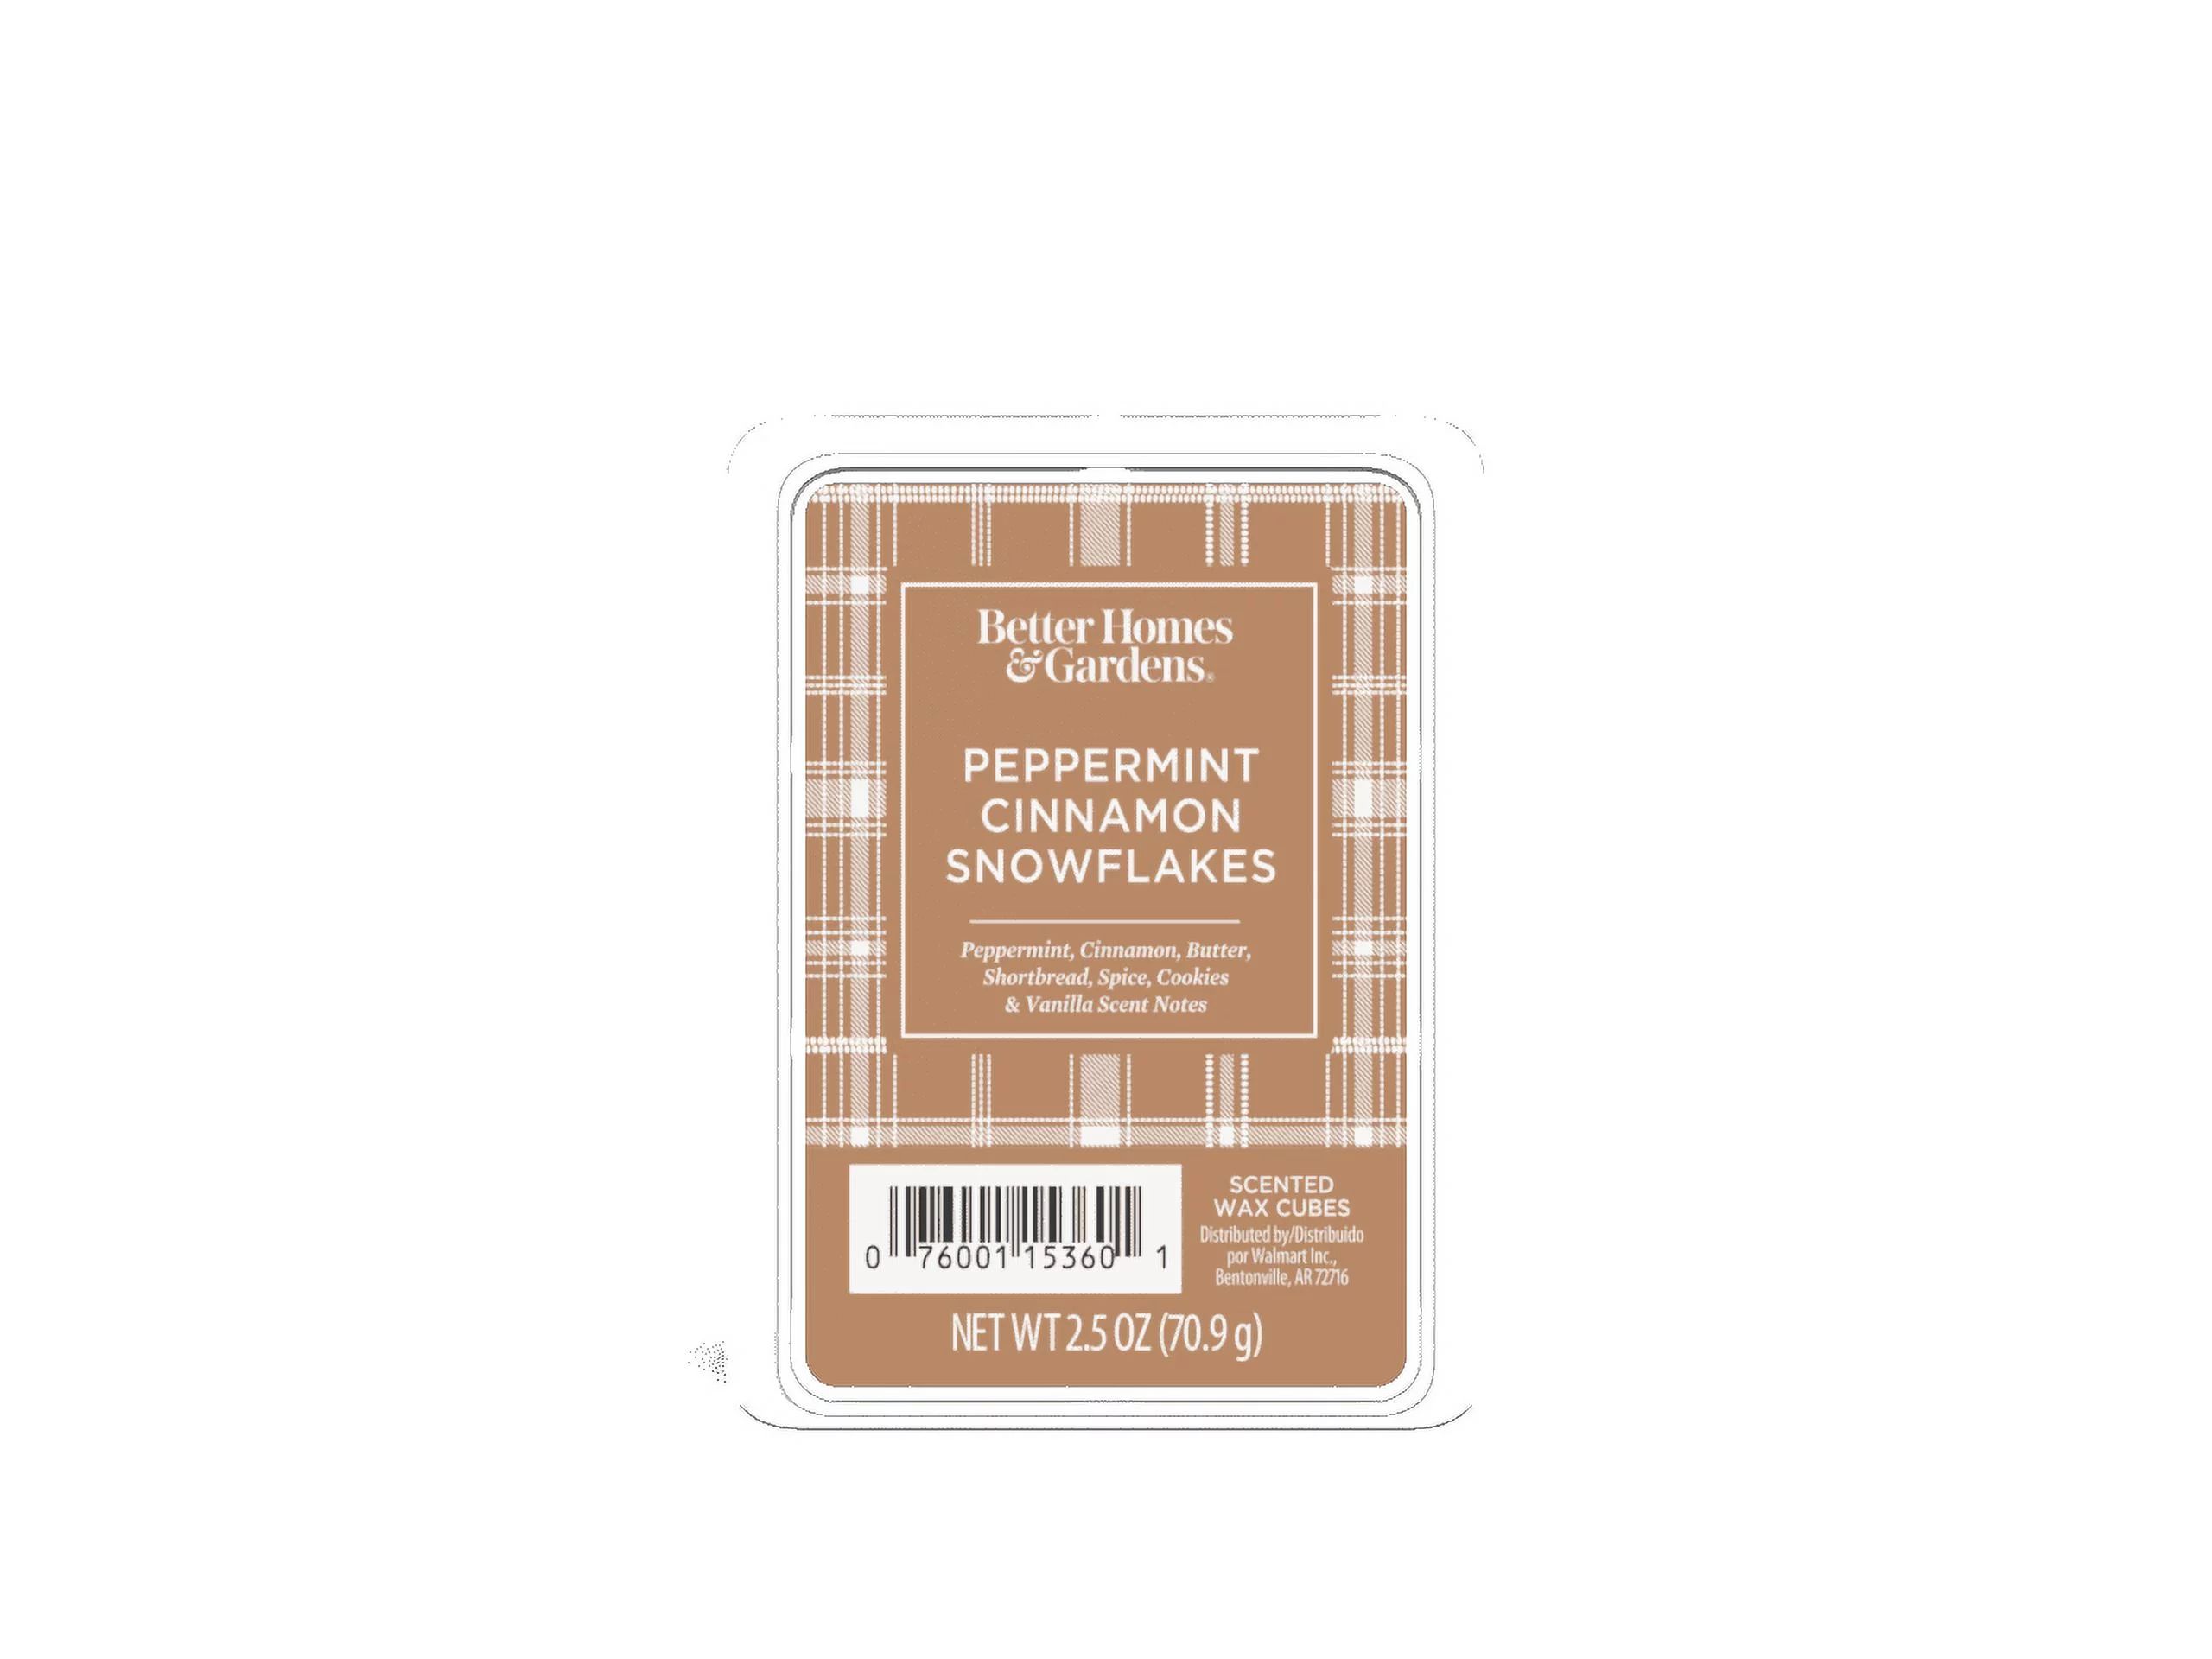 Peppermint Cinnamon Snowflakes Scented Wax Melts, Better Homes & Gardens 2.5 oz (1-Pack) | Walmart (US)